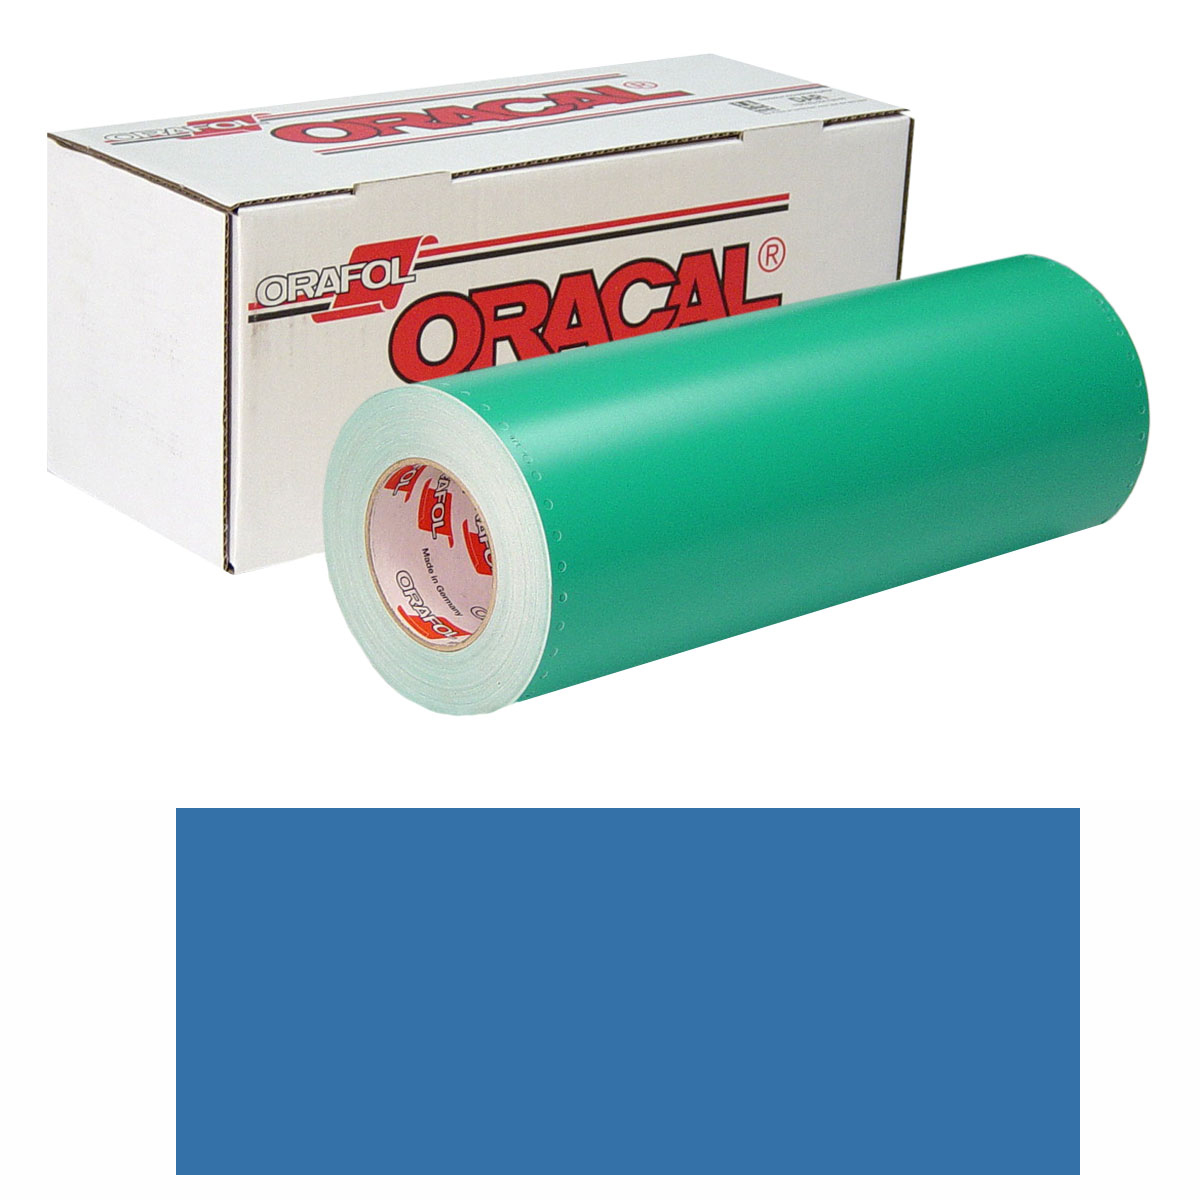 ORACAL 8500 30in X 10yd 005 Middle Blue